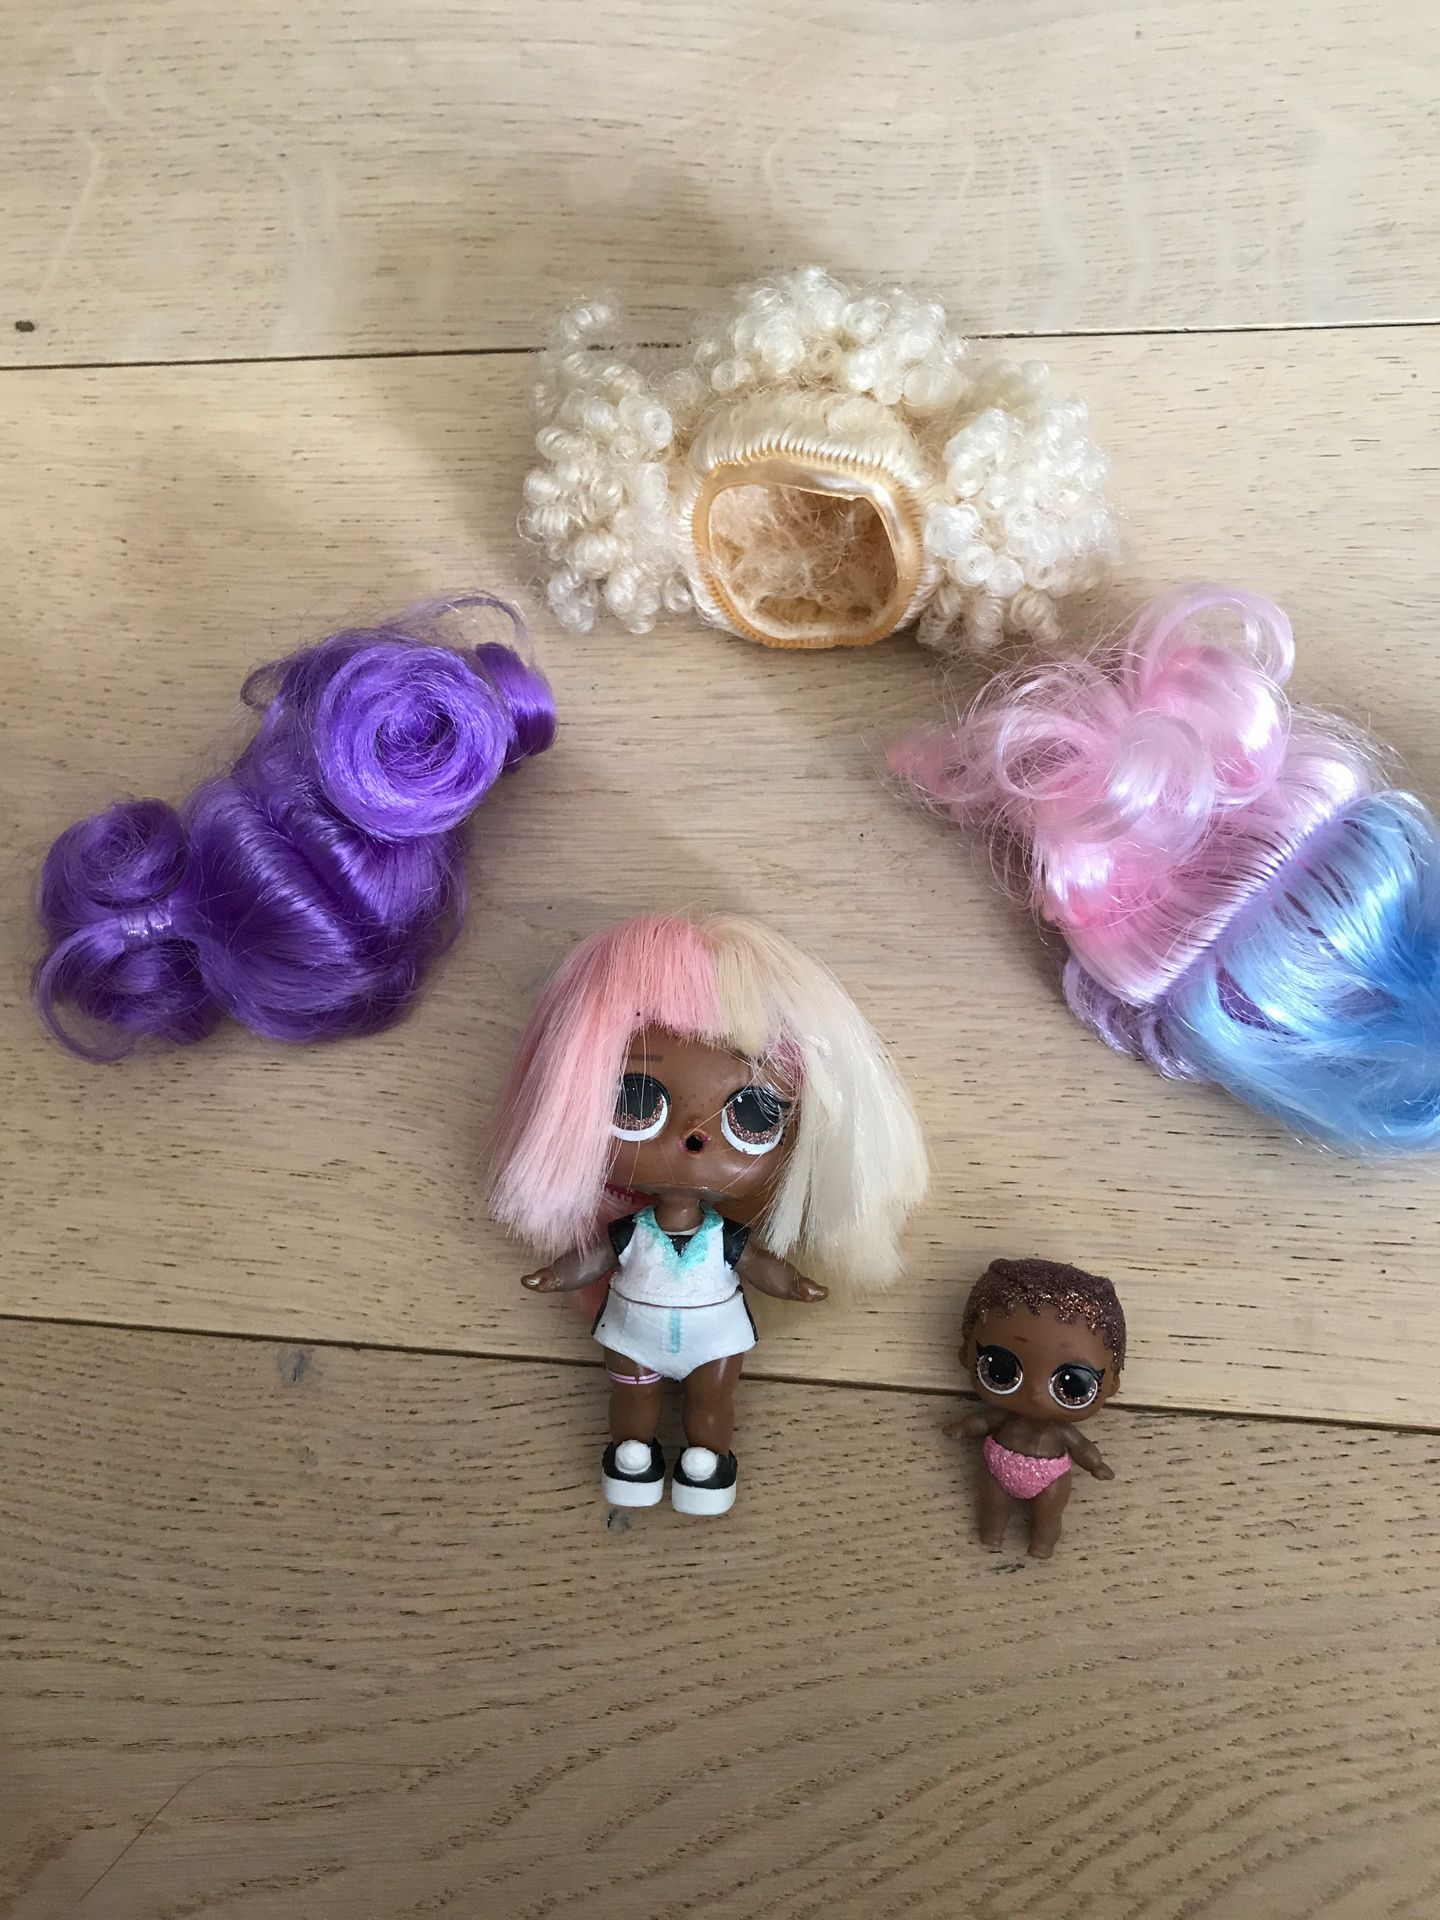 Lol doll, little sister and wigs